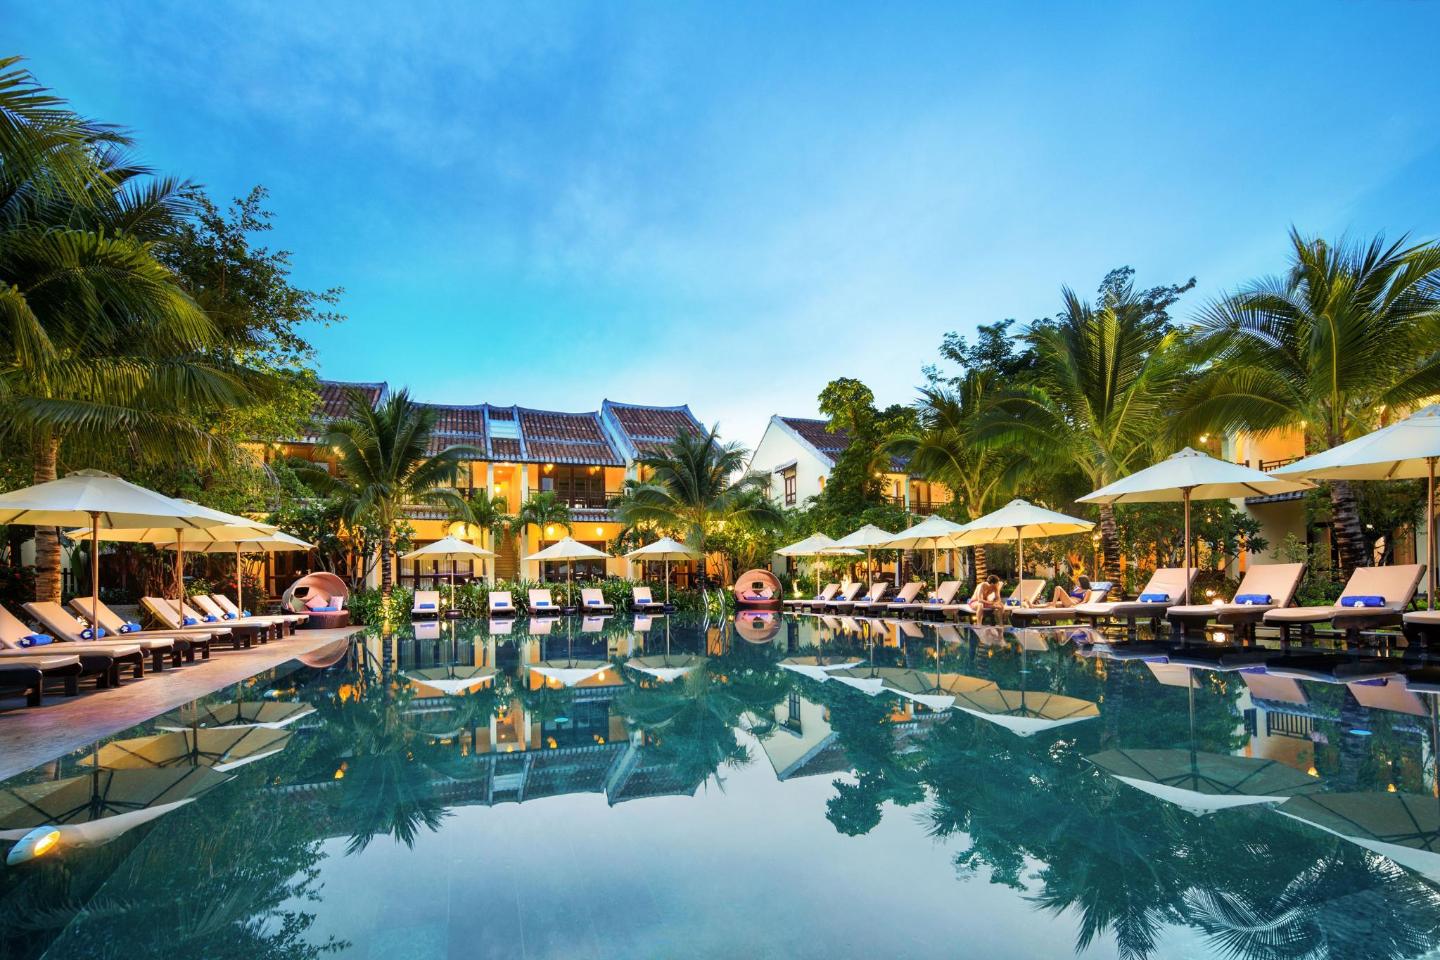 Best on-budget resorts in Hoi an